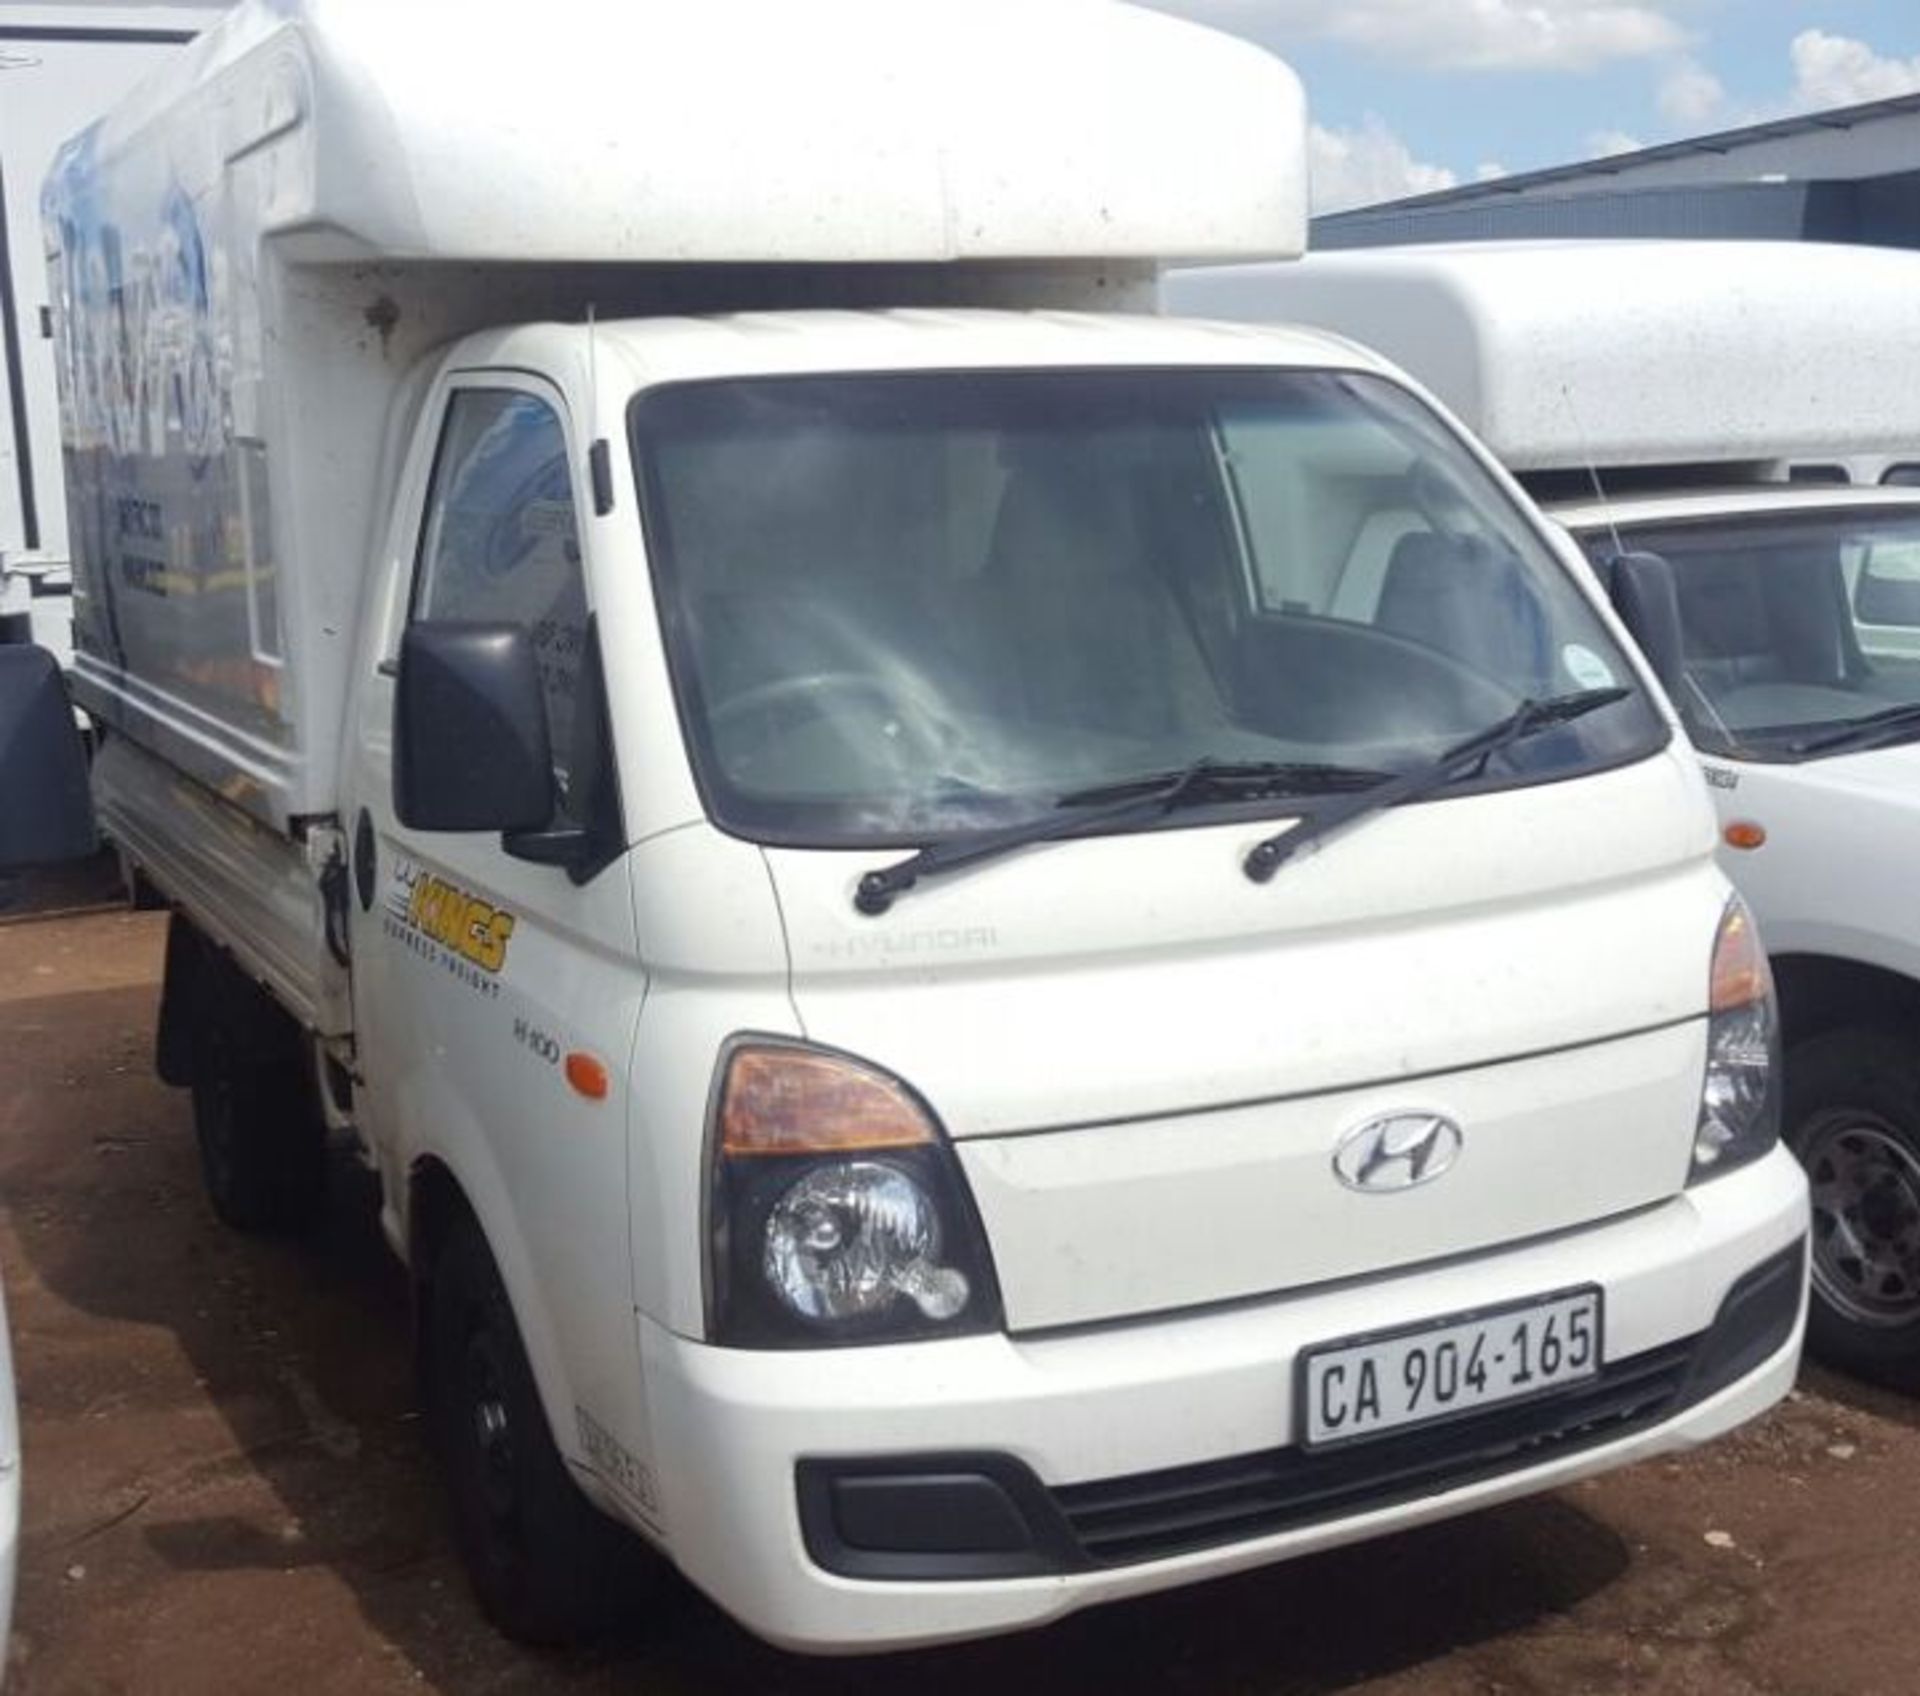 2012 HYUNDAI H100 D/SIDE WITH CANOPY - (CA904165)